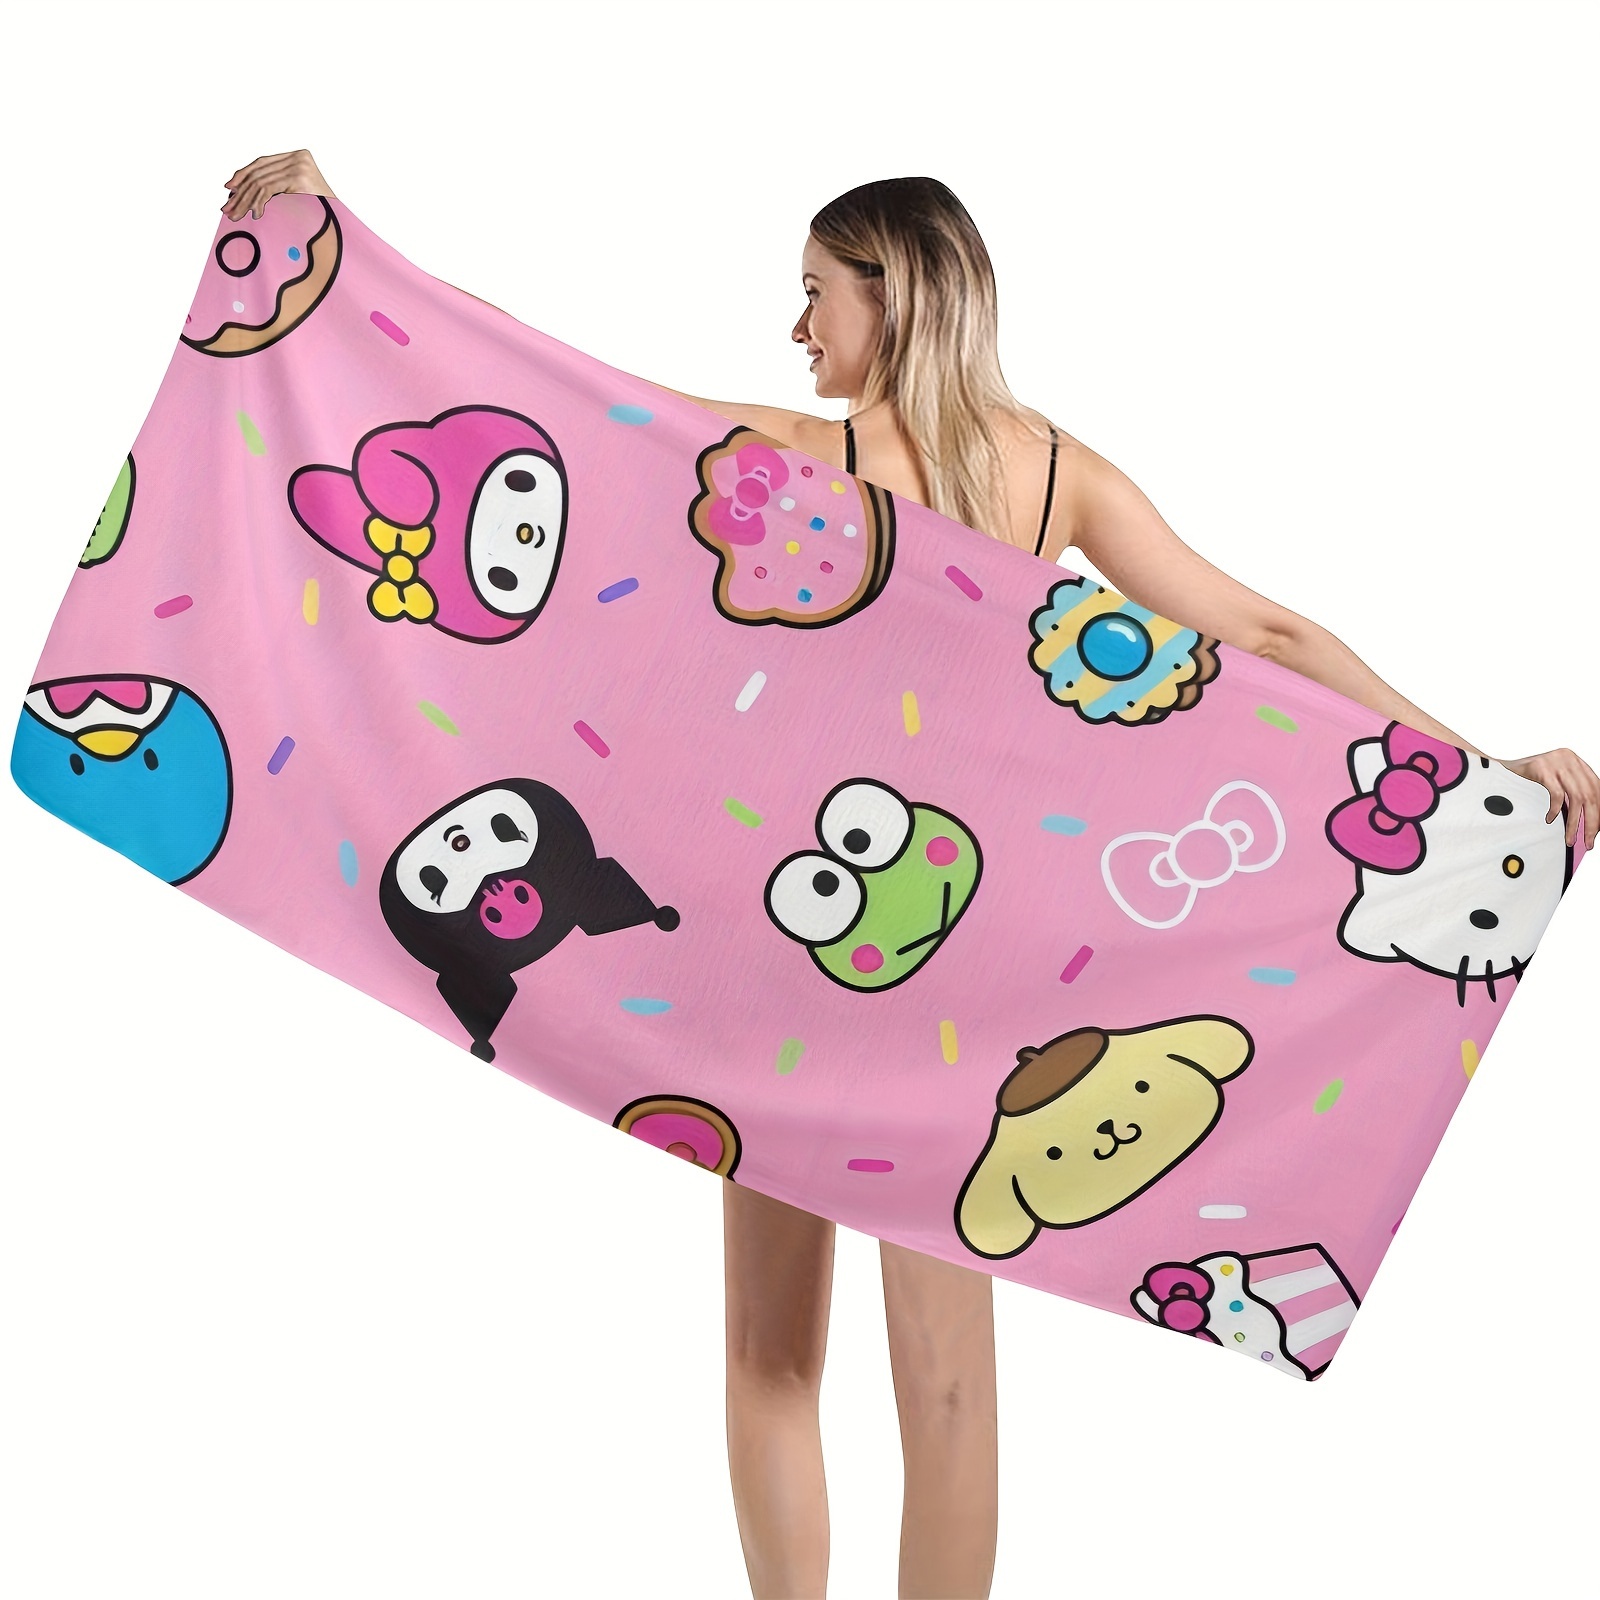 

1pc Sanrio Hello Kitty Microfiber Lightweight Beach Towel, Quick Dry, Soft, Absorbent, Perfect For Outdoor Travel, Camping, And Summer Vacation, Beach Essentials And Bathroom Accessory